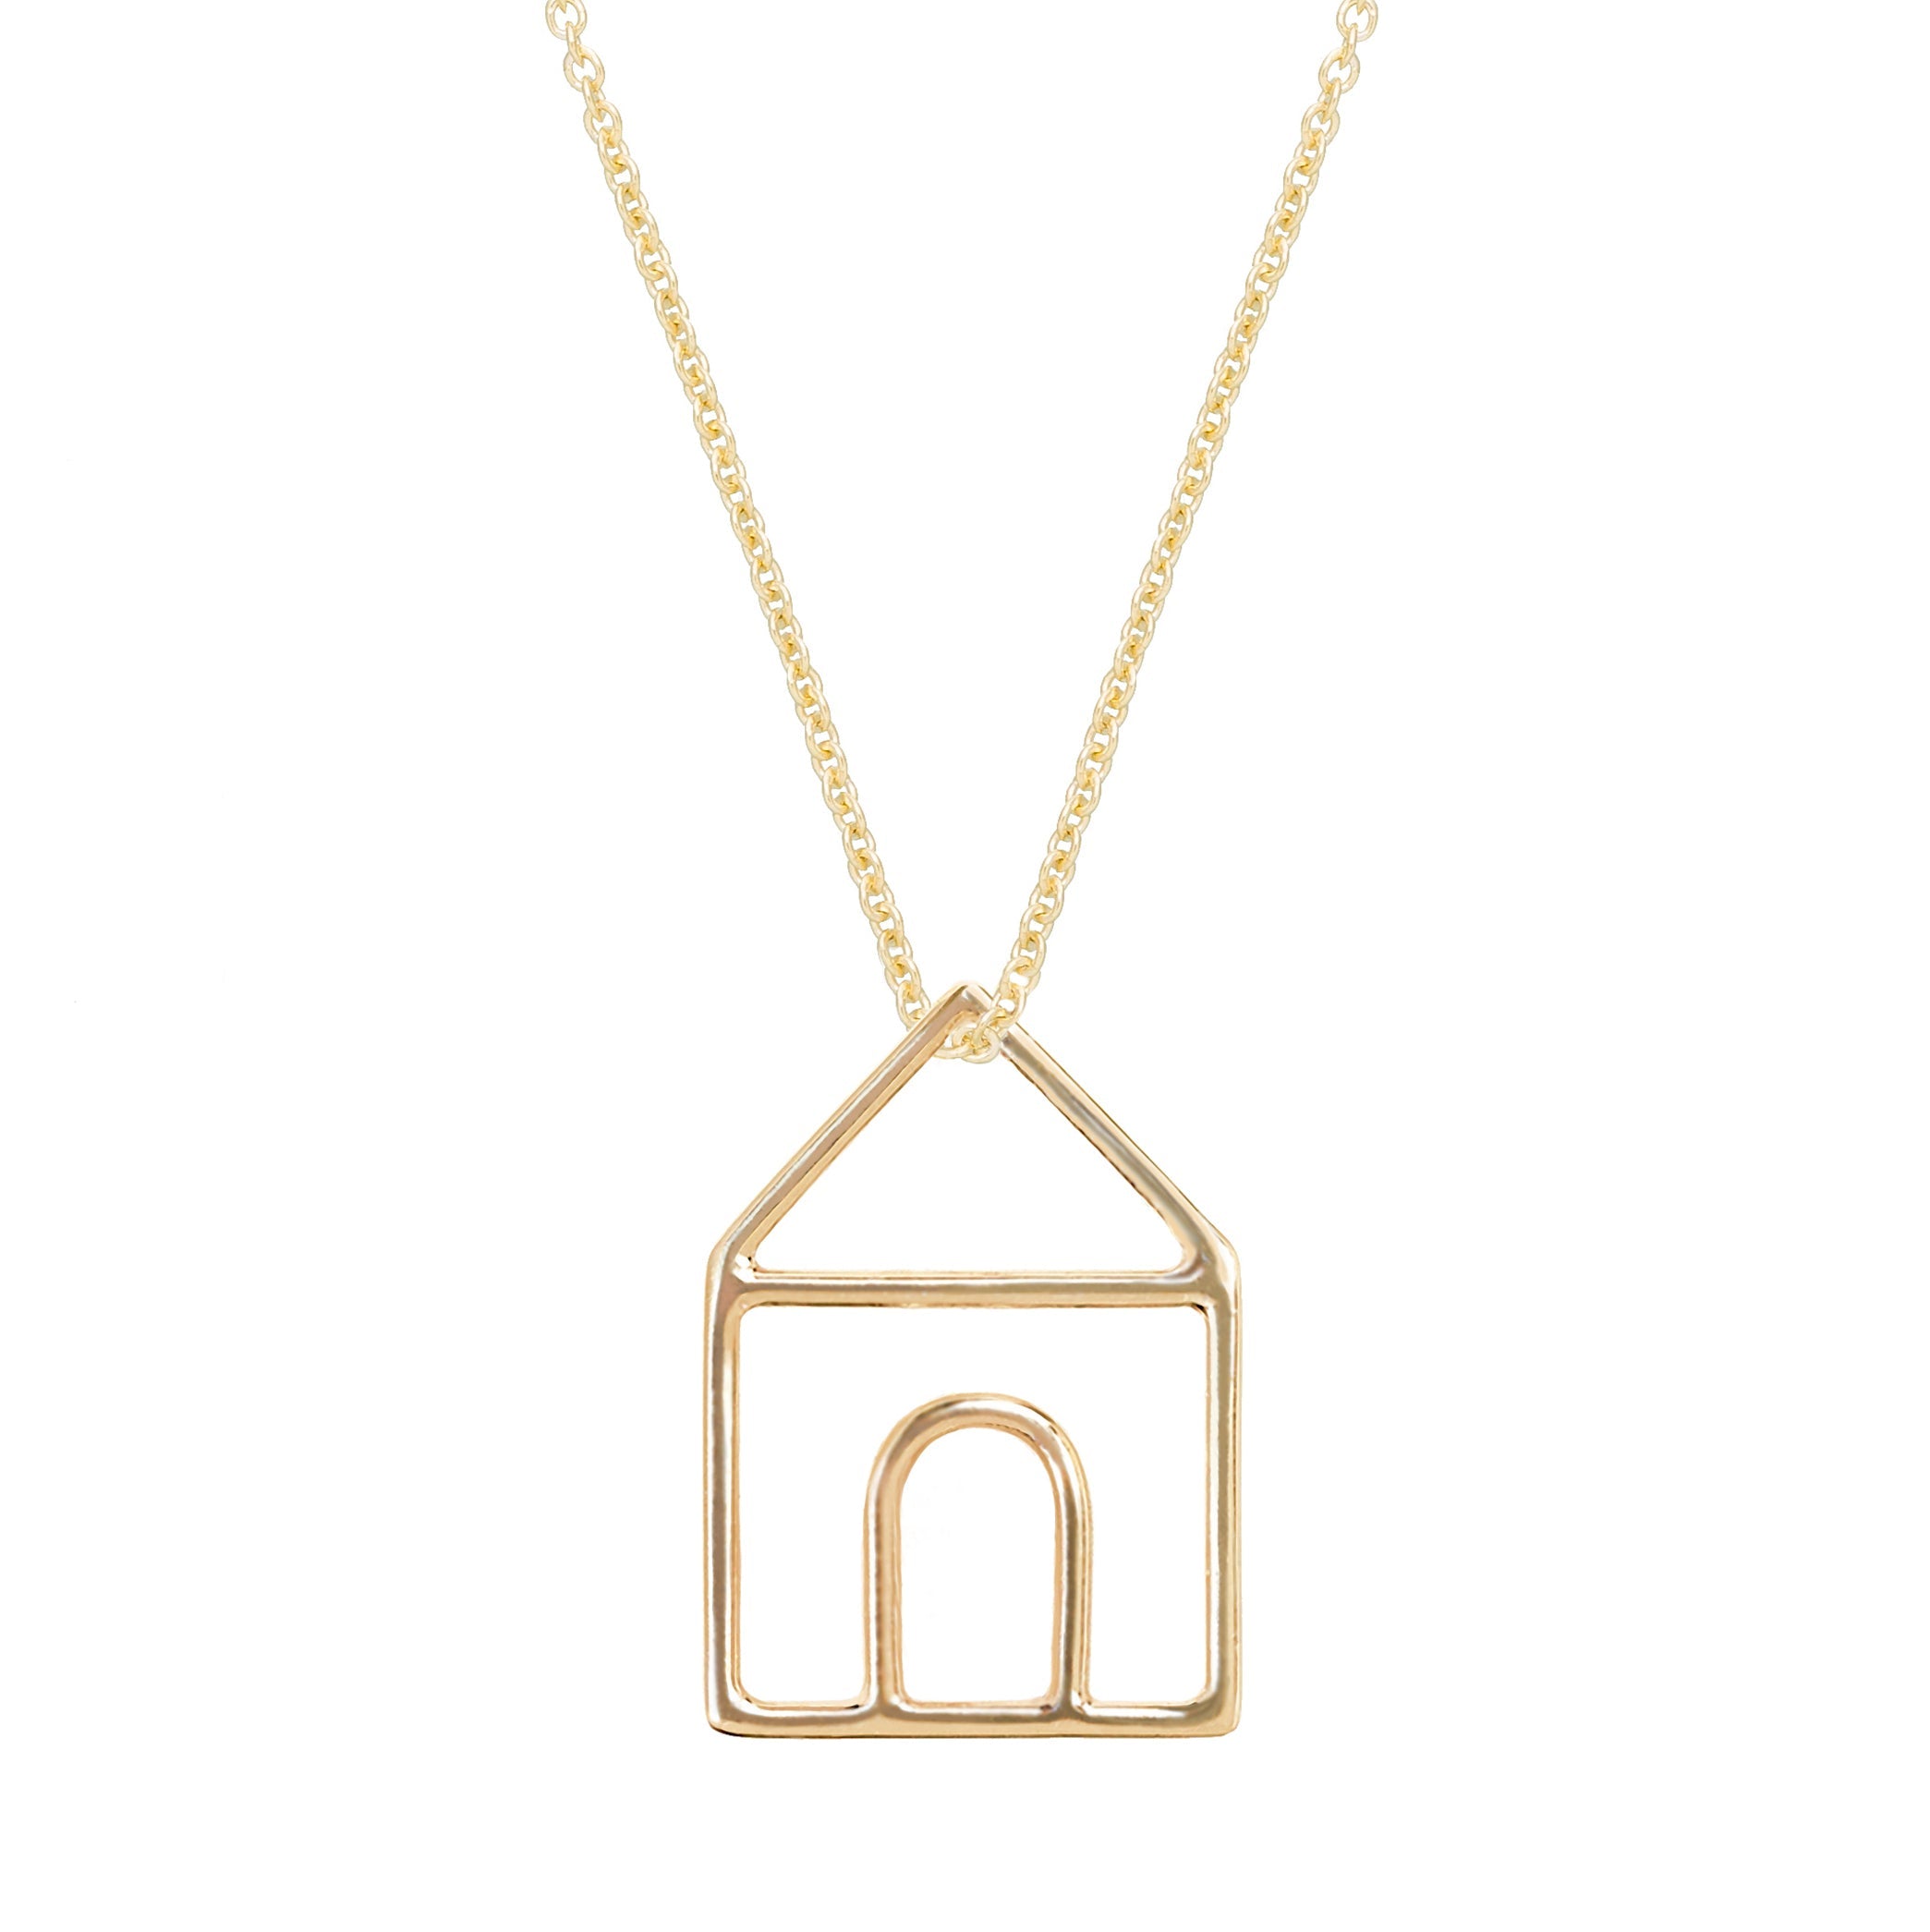 Gold chain necklace with gold house shaped pendant